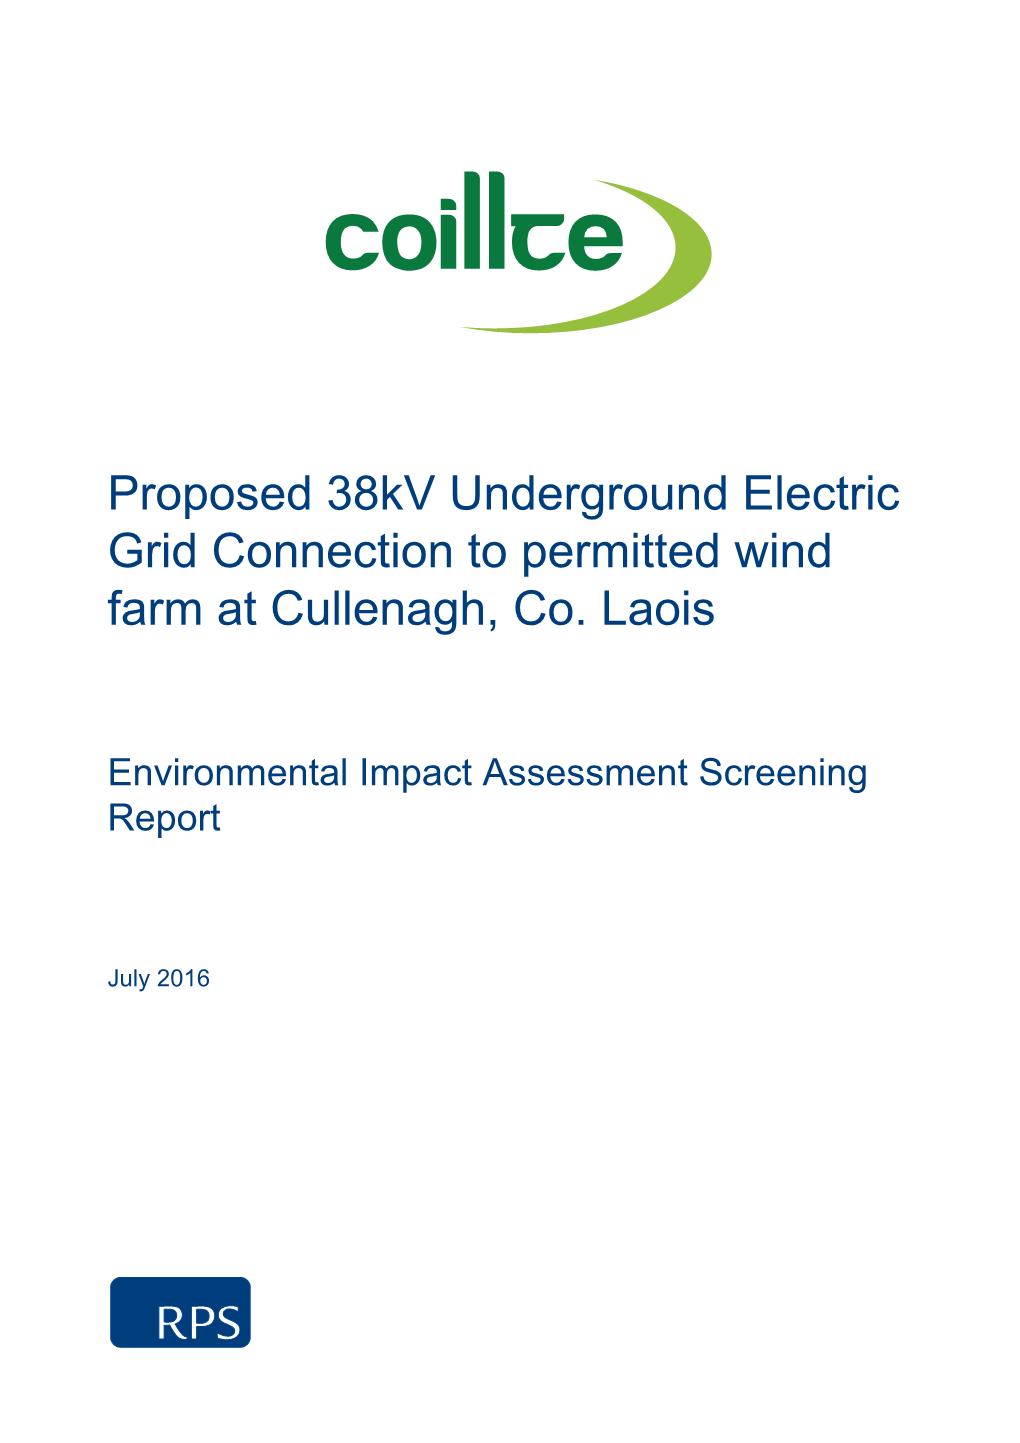 Proposed 38Kv Underground Electric Grid Connection to Permitted Wind Farm at Cullenagh, Co